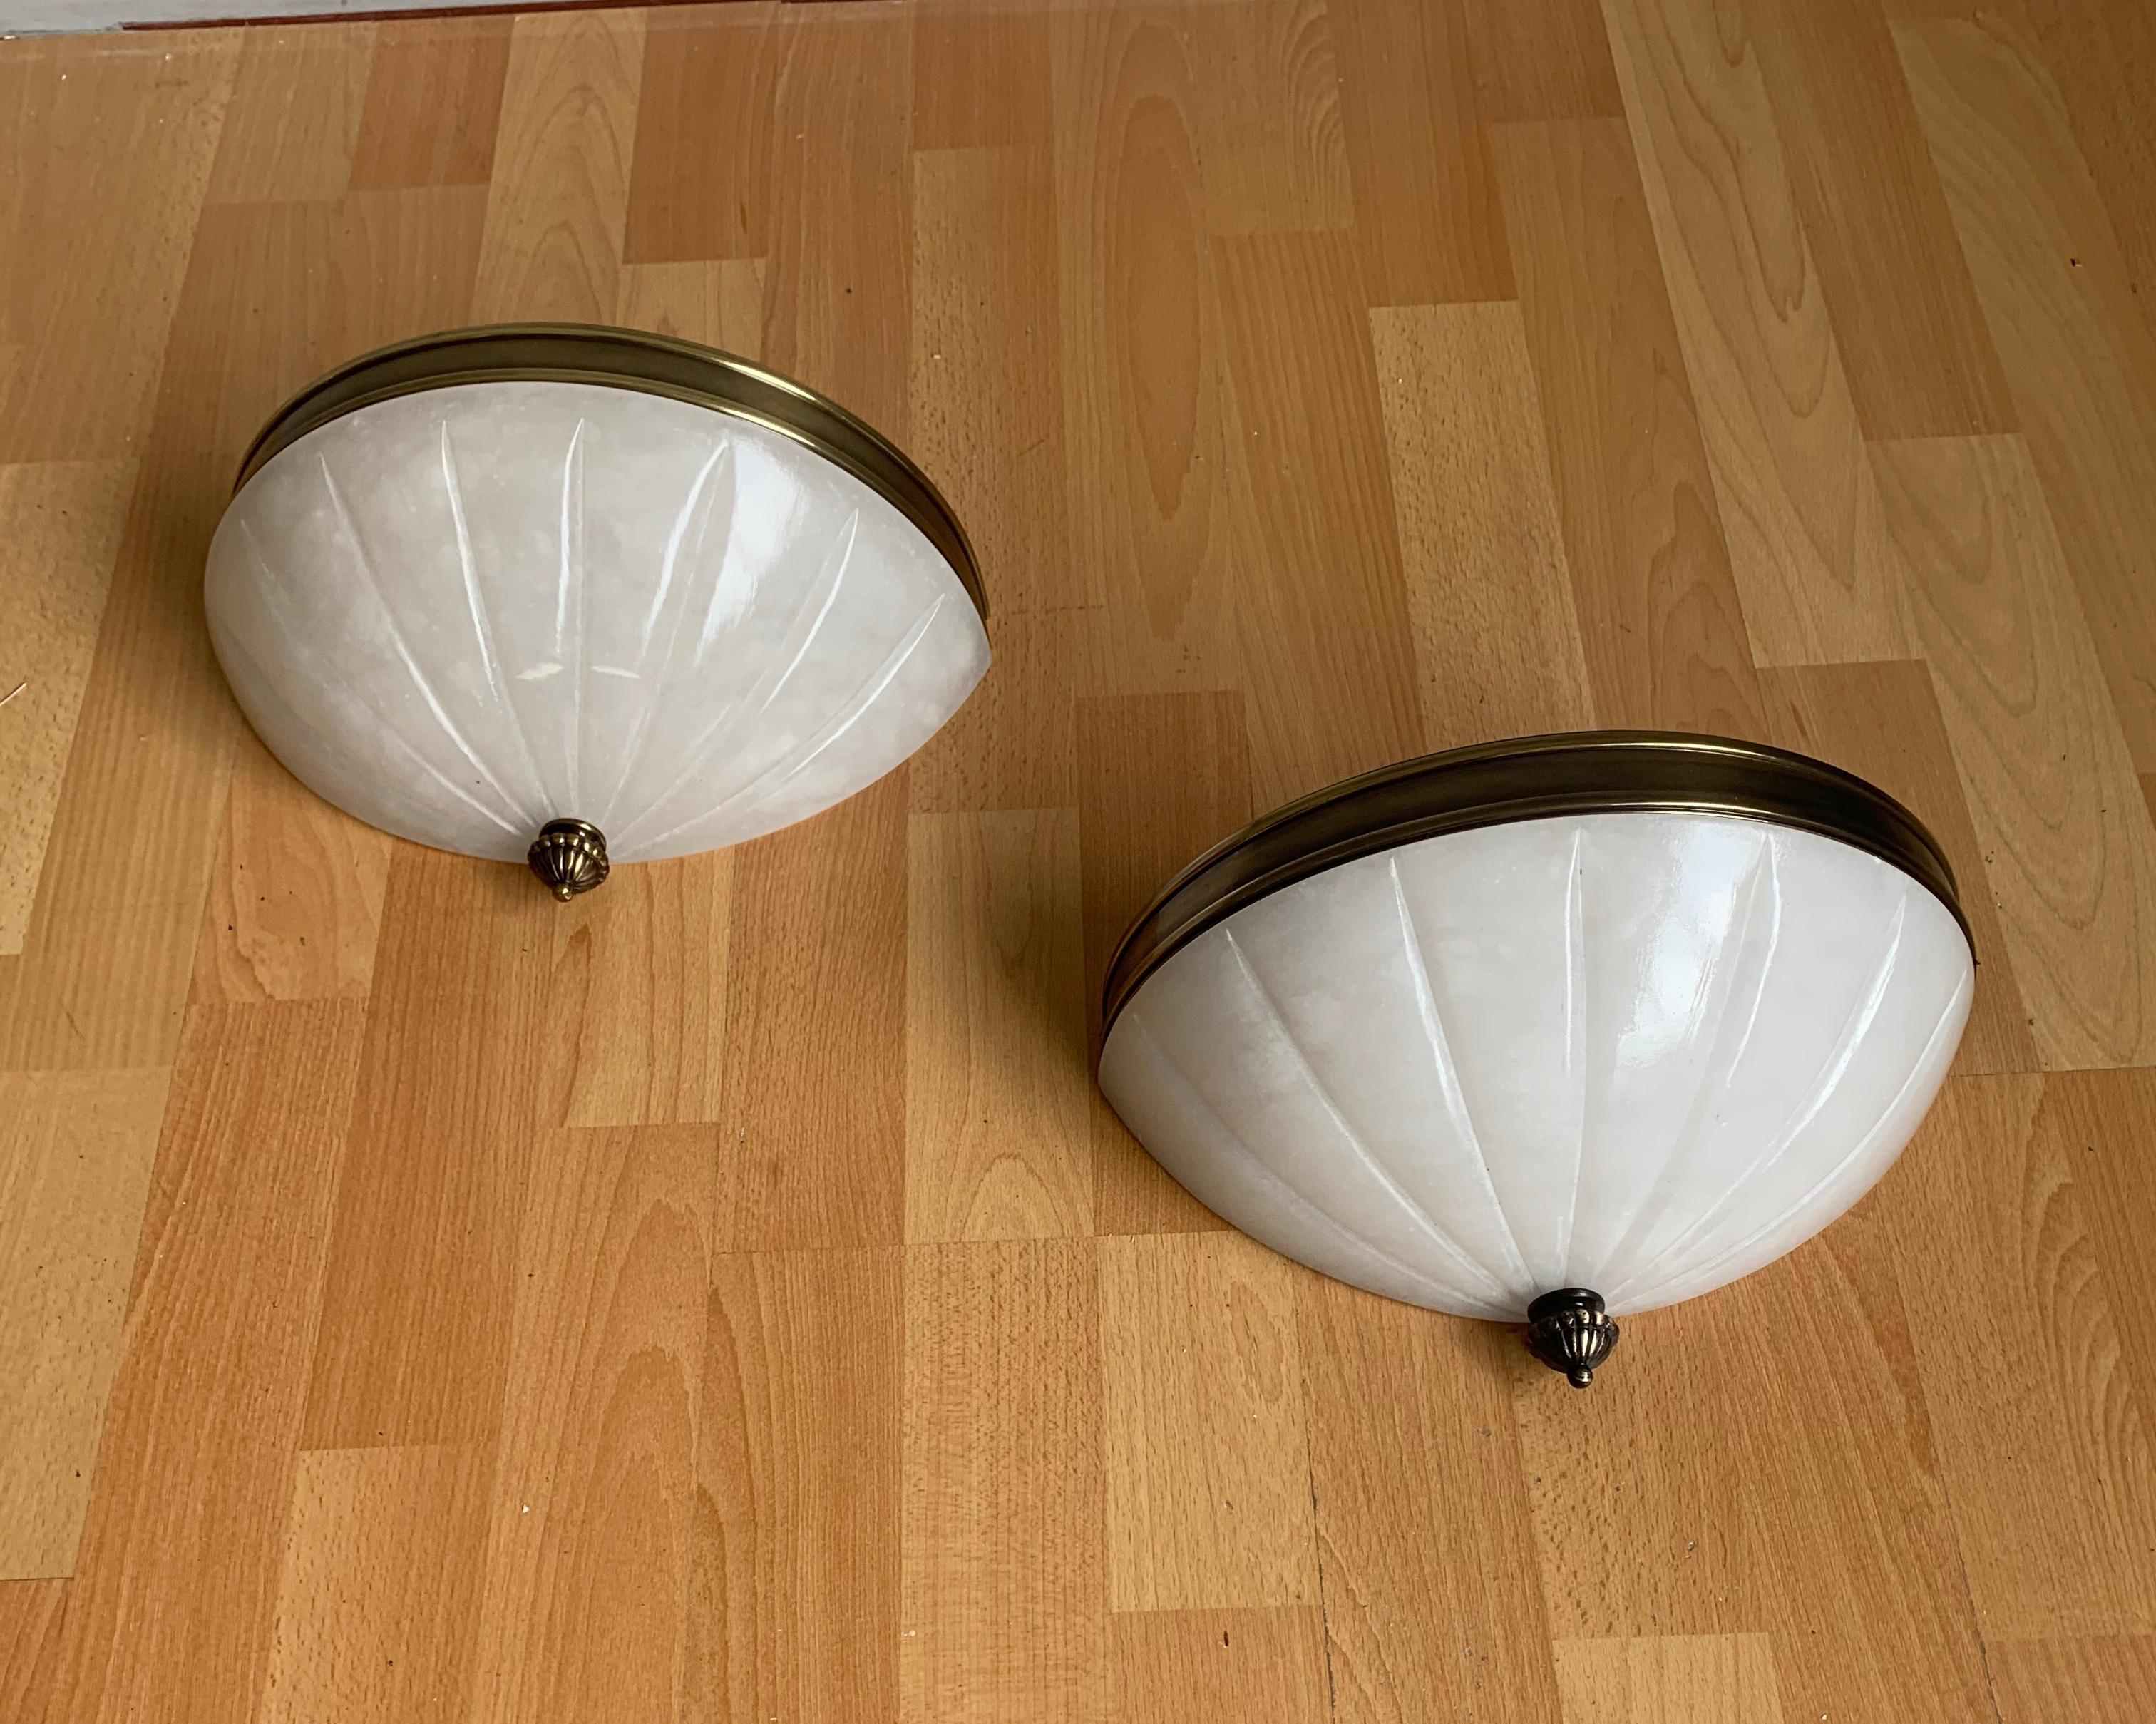 Rare Pair of Midcentury Modern, Alabaster & Brass Wall Sconces / Fixtures For Sale 12